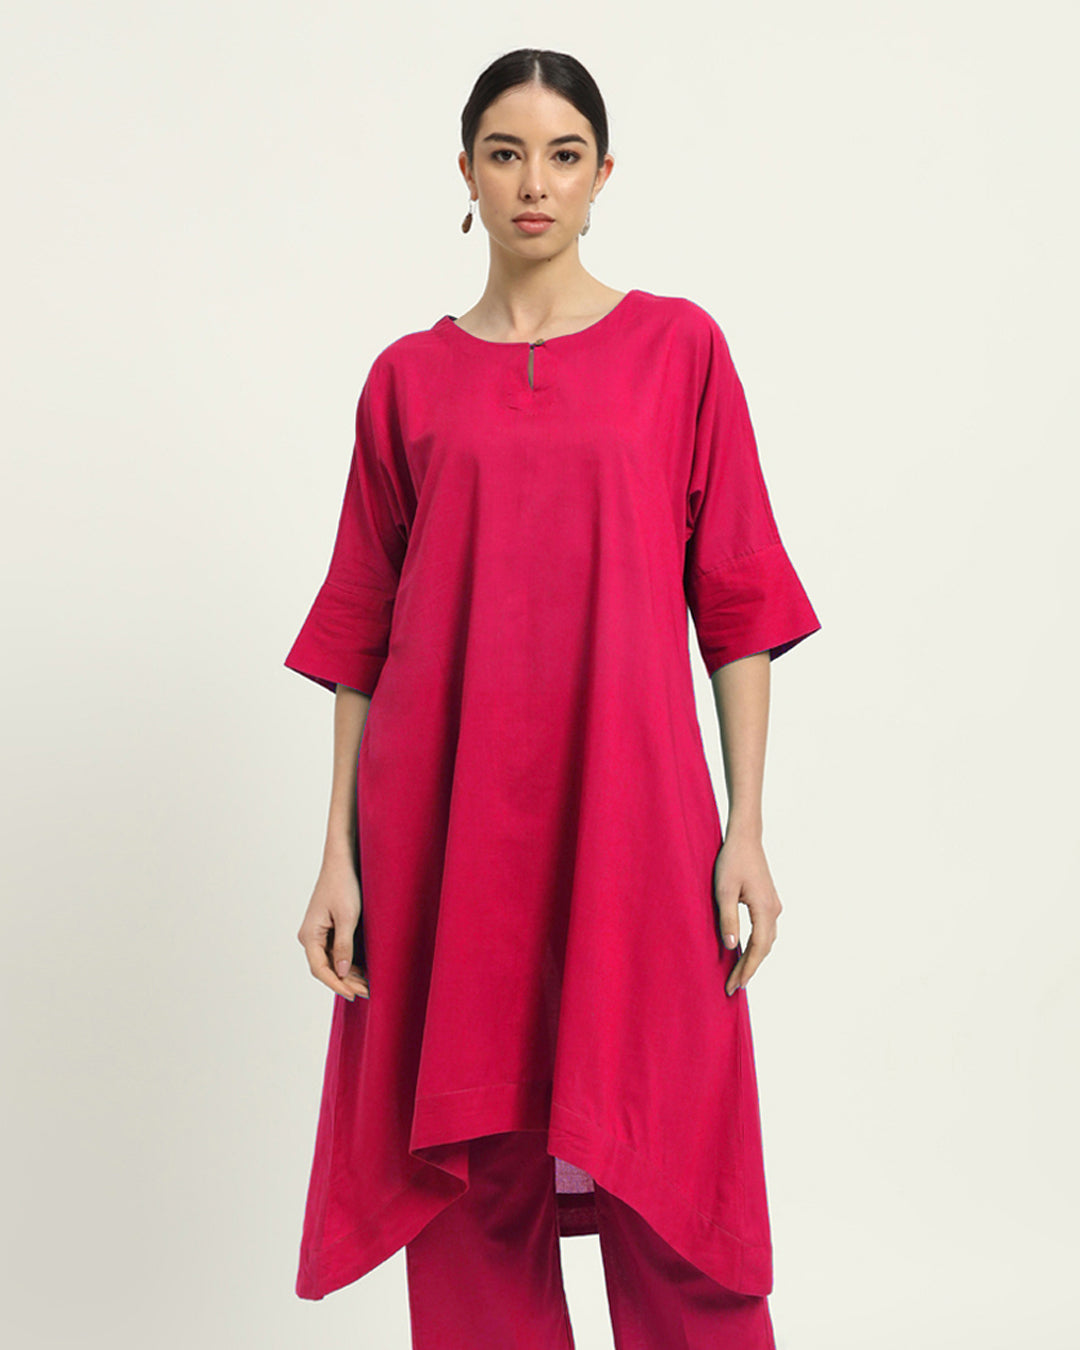 Queen's Gulabi Flare & Flow Boat Neck Solid Kurta (Without Bottoms)